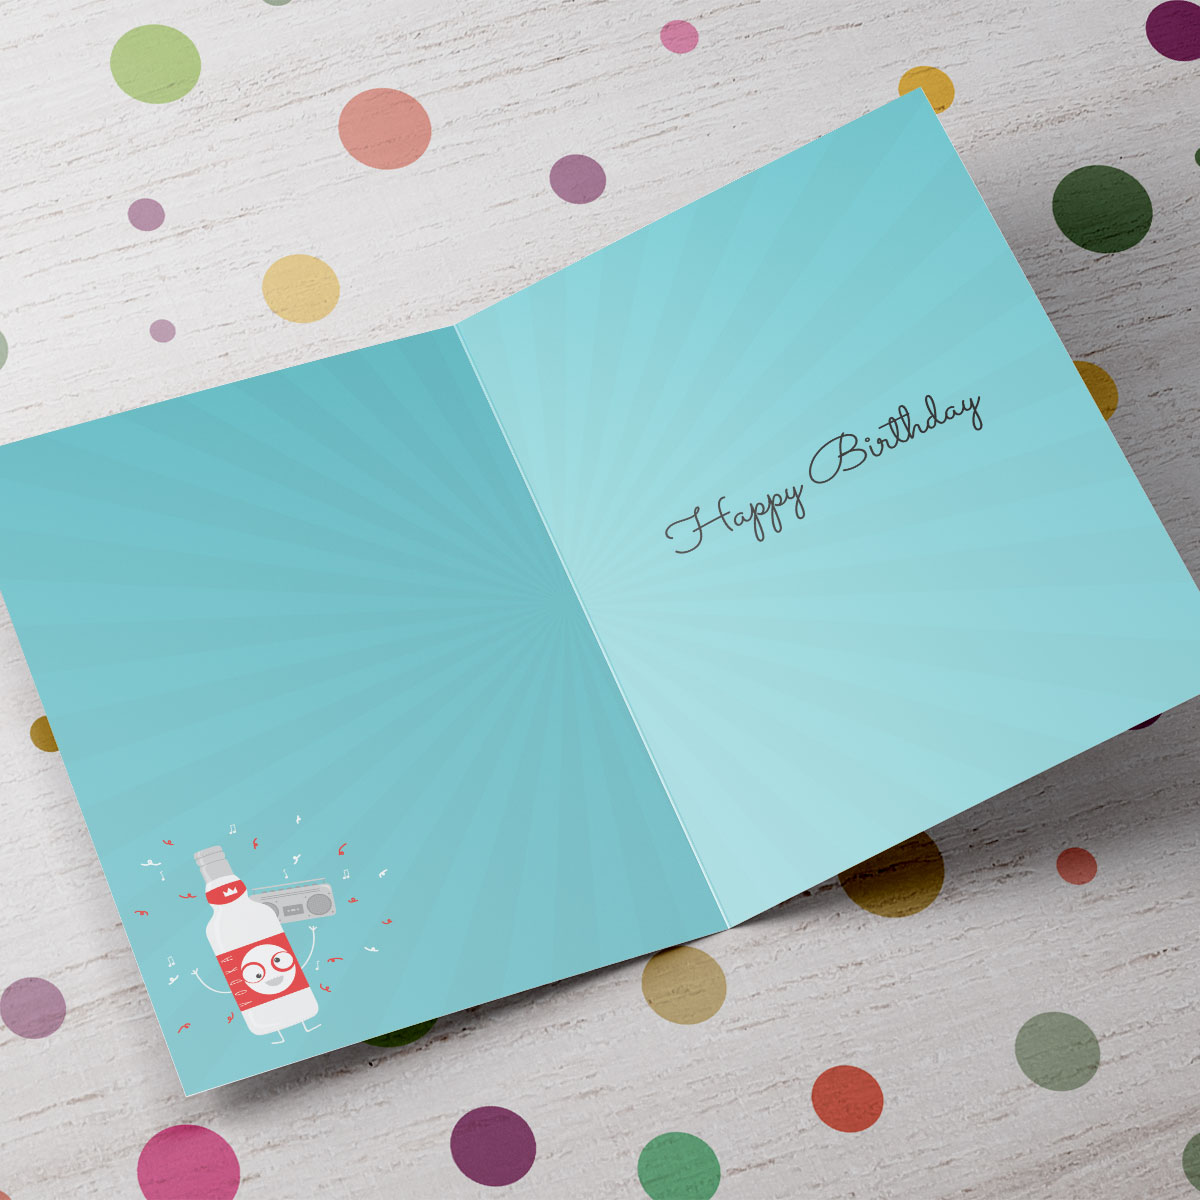 Personalised Birthday Card - You're Spirited